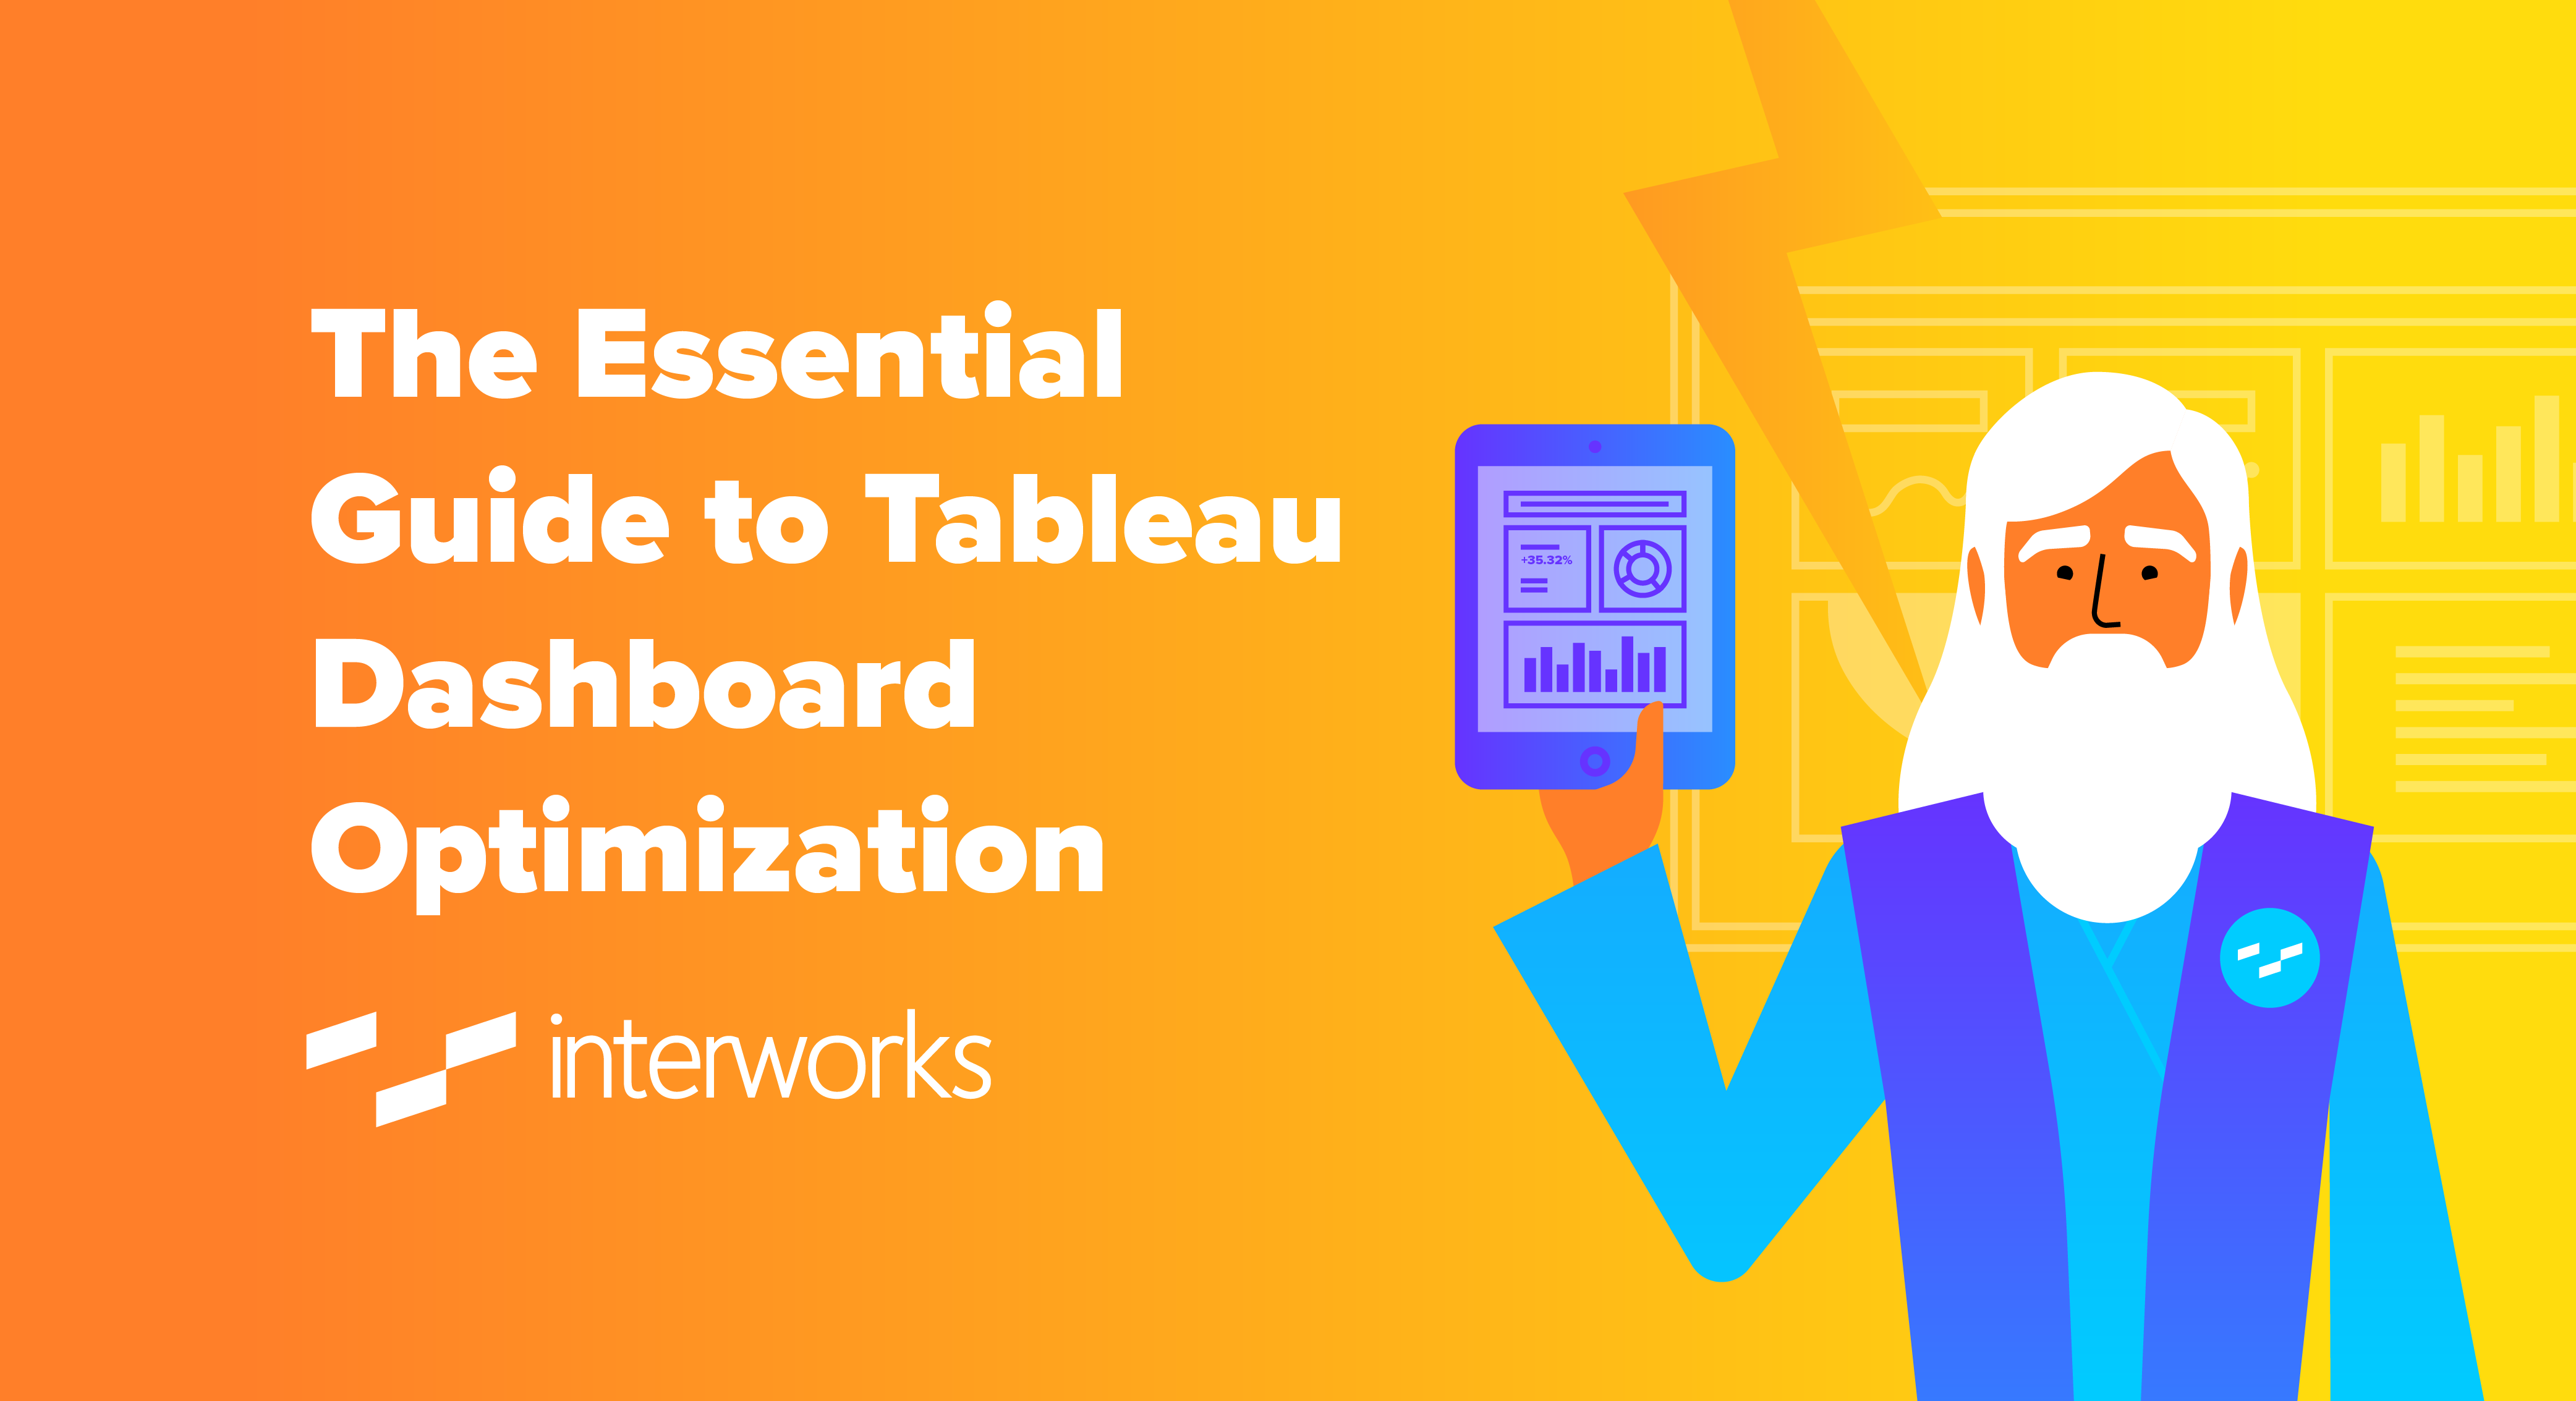 The Essential Guide to Tableau Dashboard Optimization